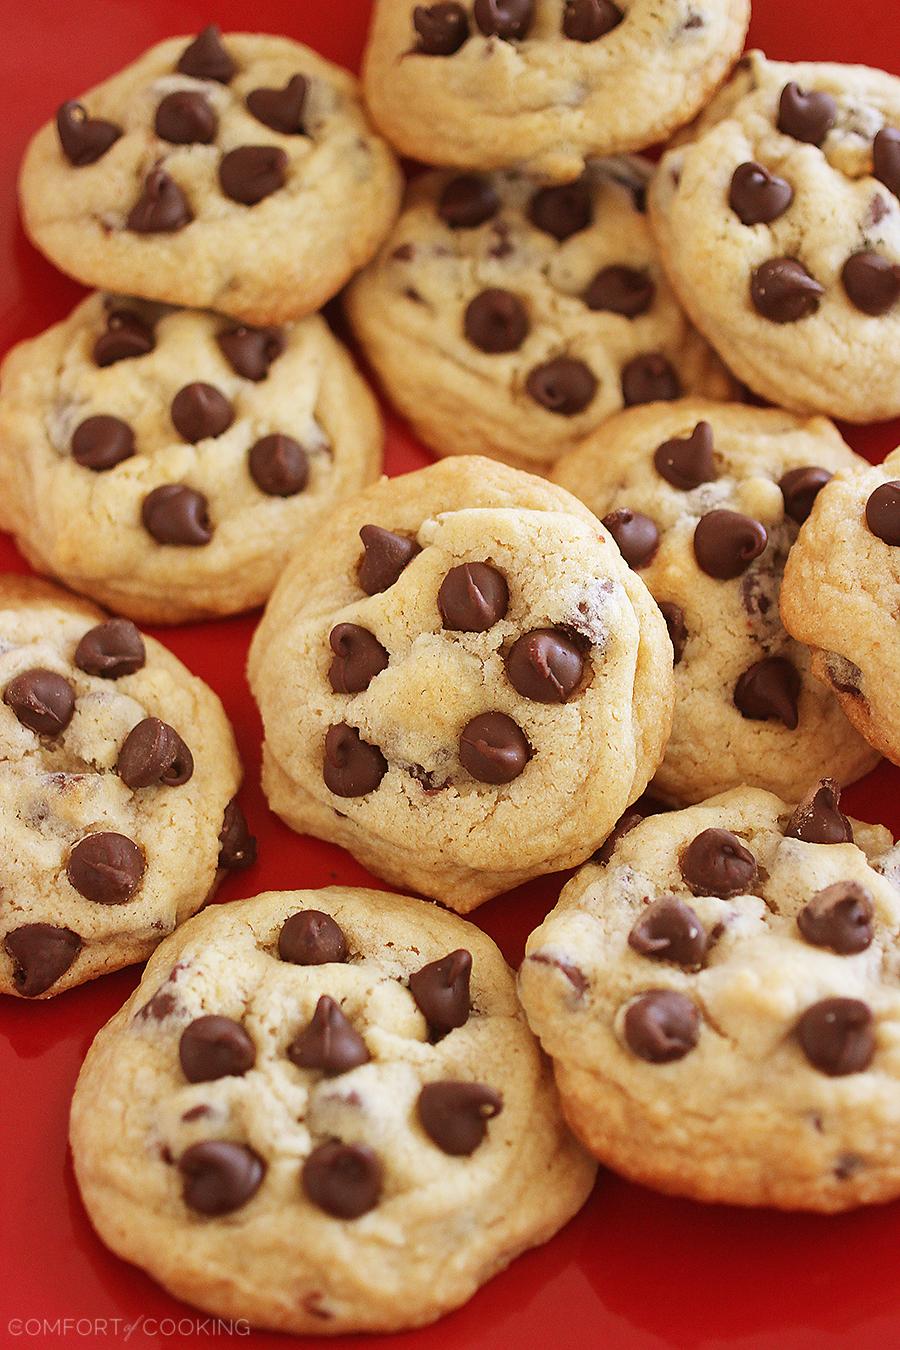 Best-Ever Soft, Chewy Chocolate Chip Cookies – The Comfort of Cooking